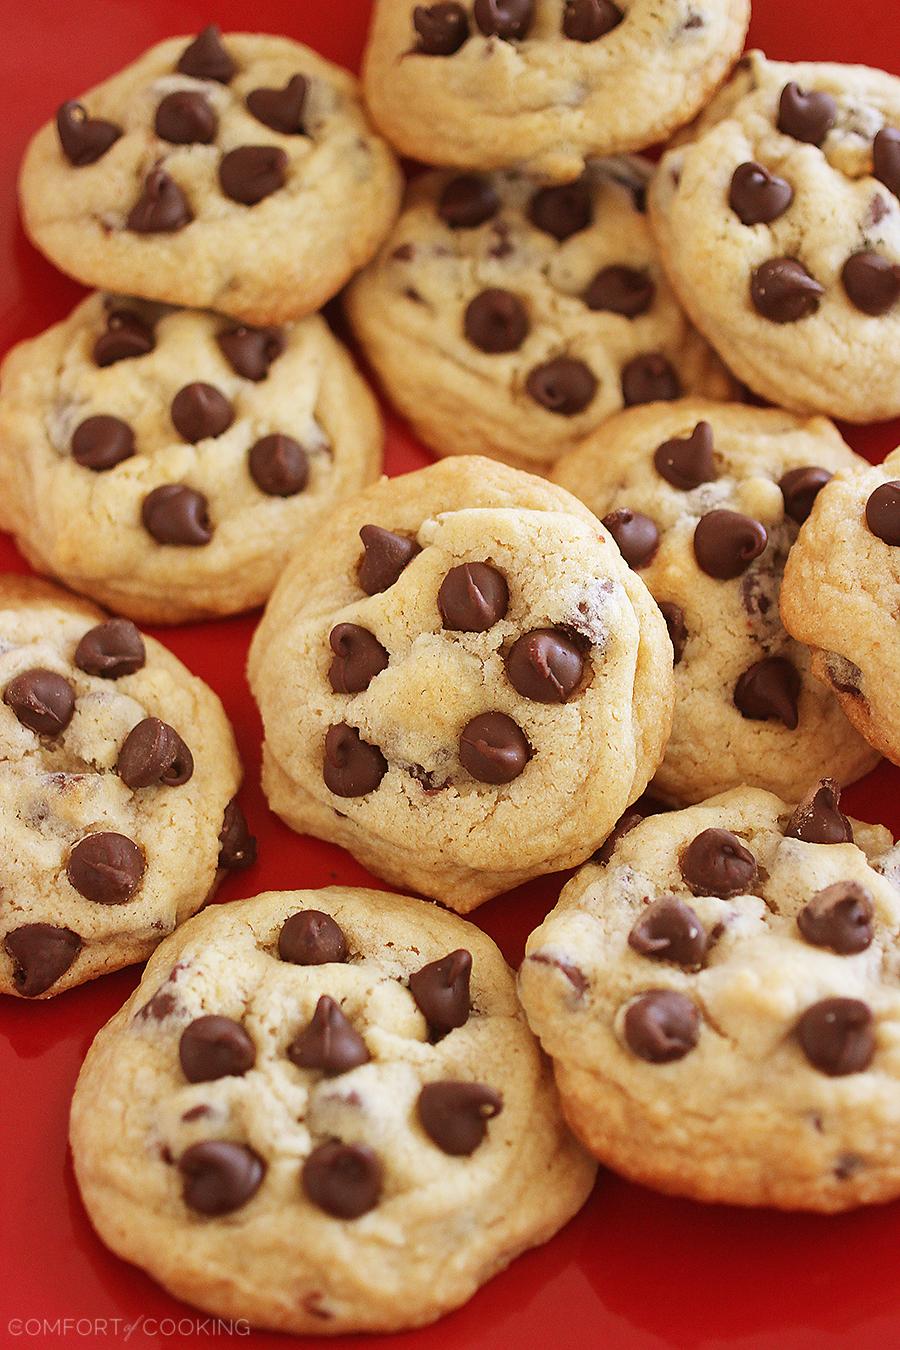 Best-Ever Soft, Chewy Chocolate Chip Cookies – The Comfort of Cooking